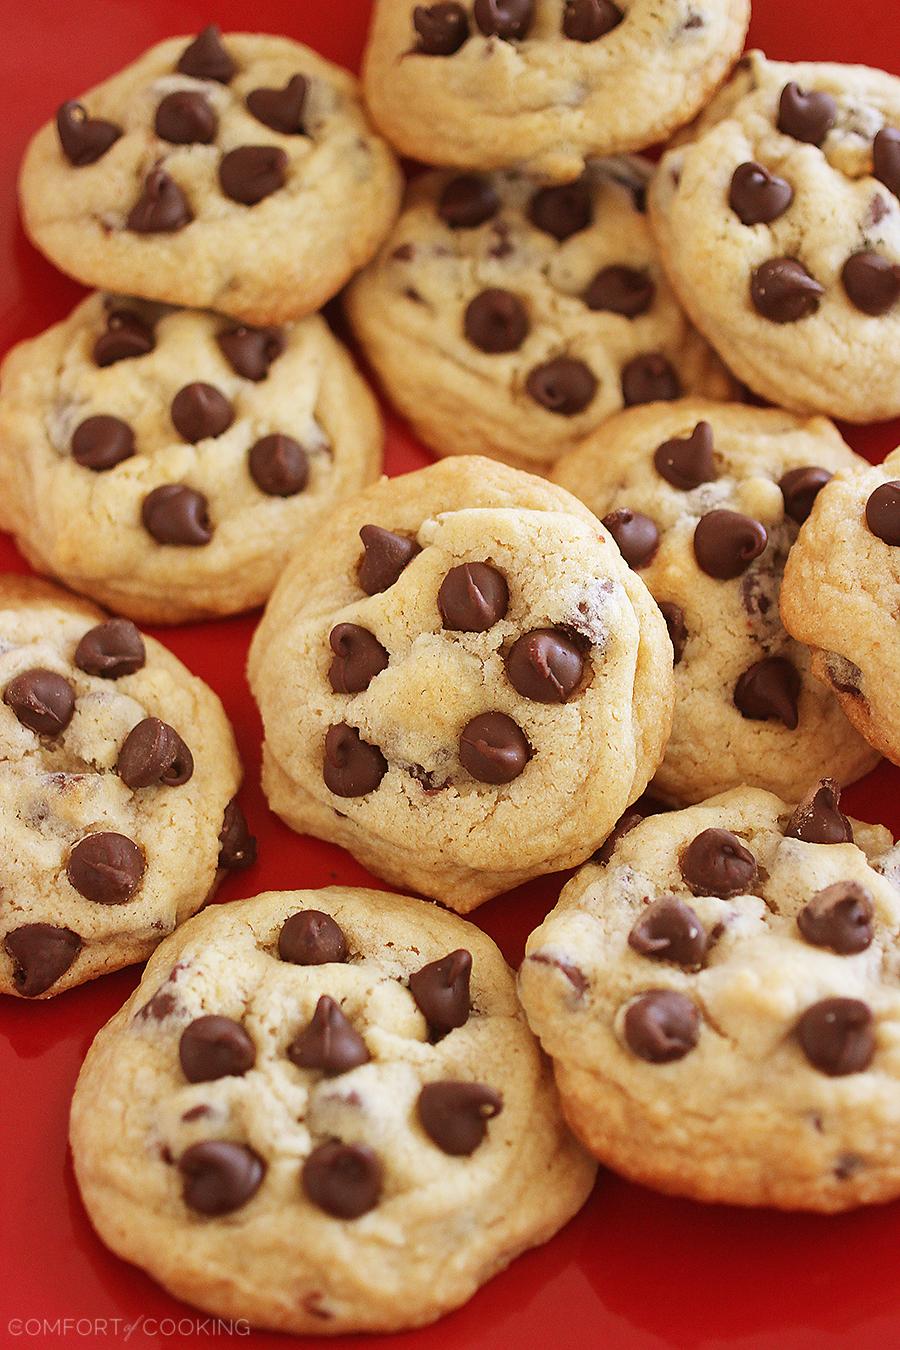 Best-Ever Soft, Chewy Chocolate Chip Cookies – The Comfort of Cooking